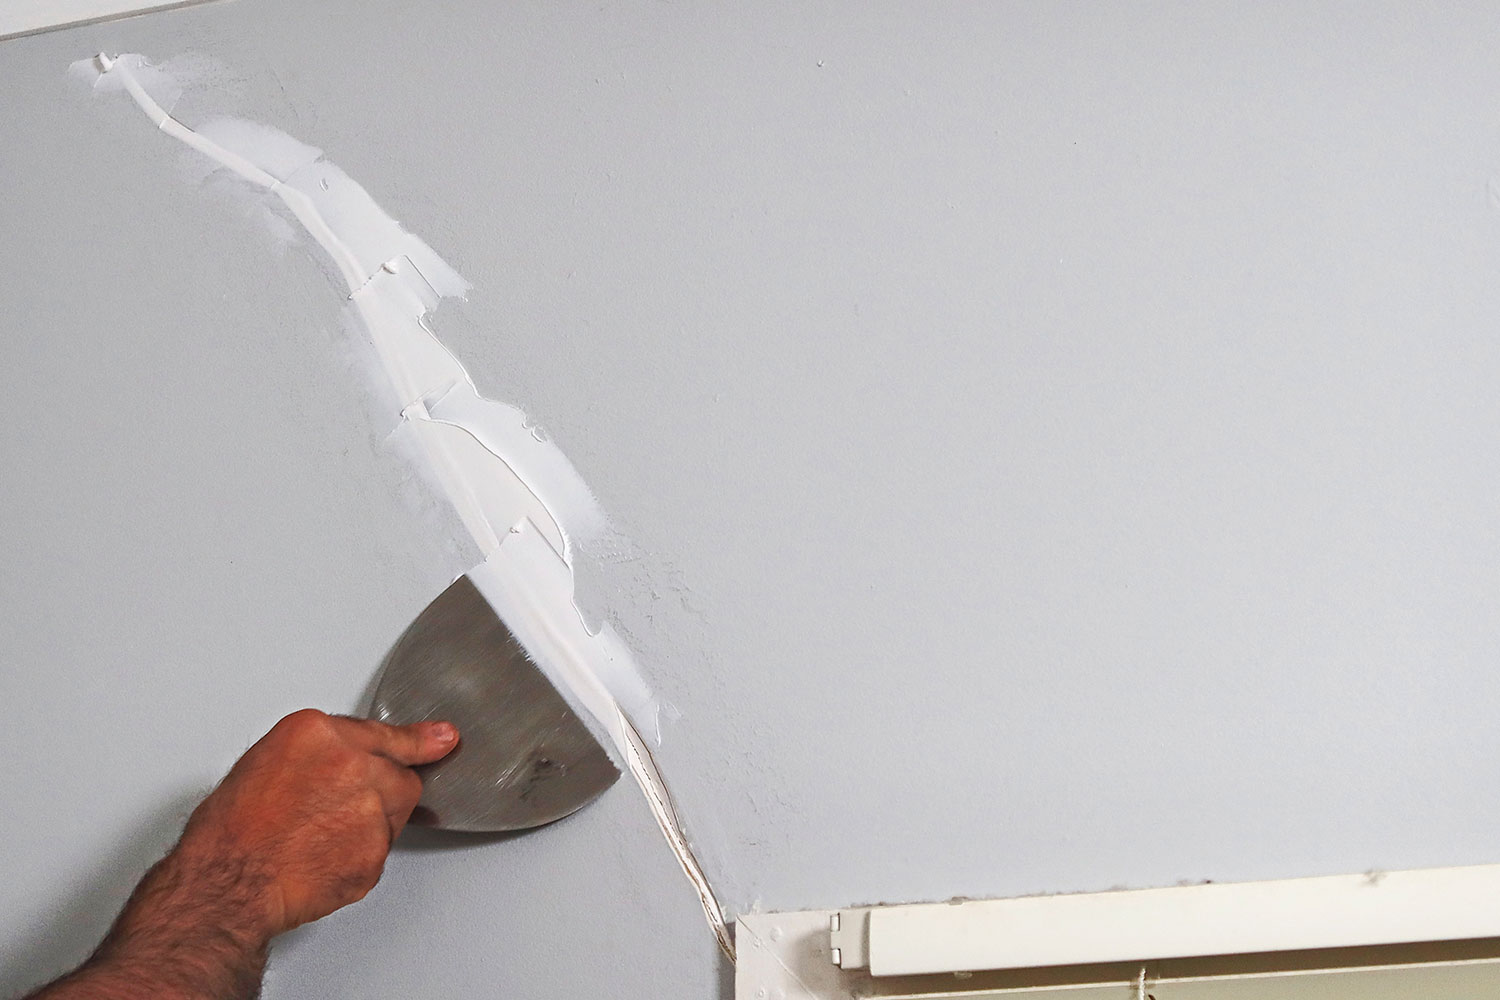 How to fix wall cracks: Step-by-step guide to repairing a crack in the wall | Better Homes and Gardens